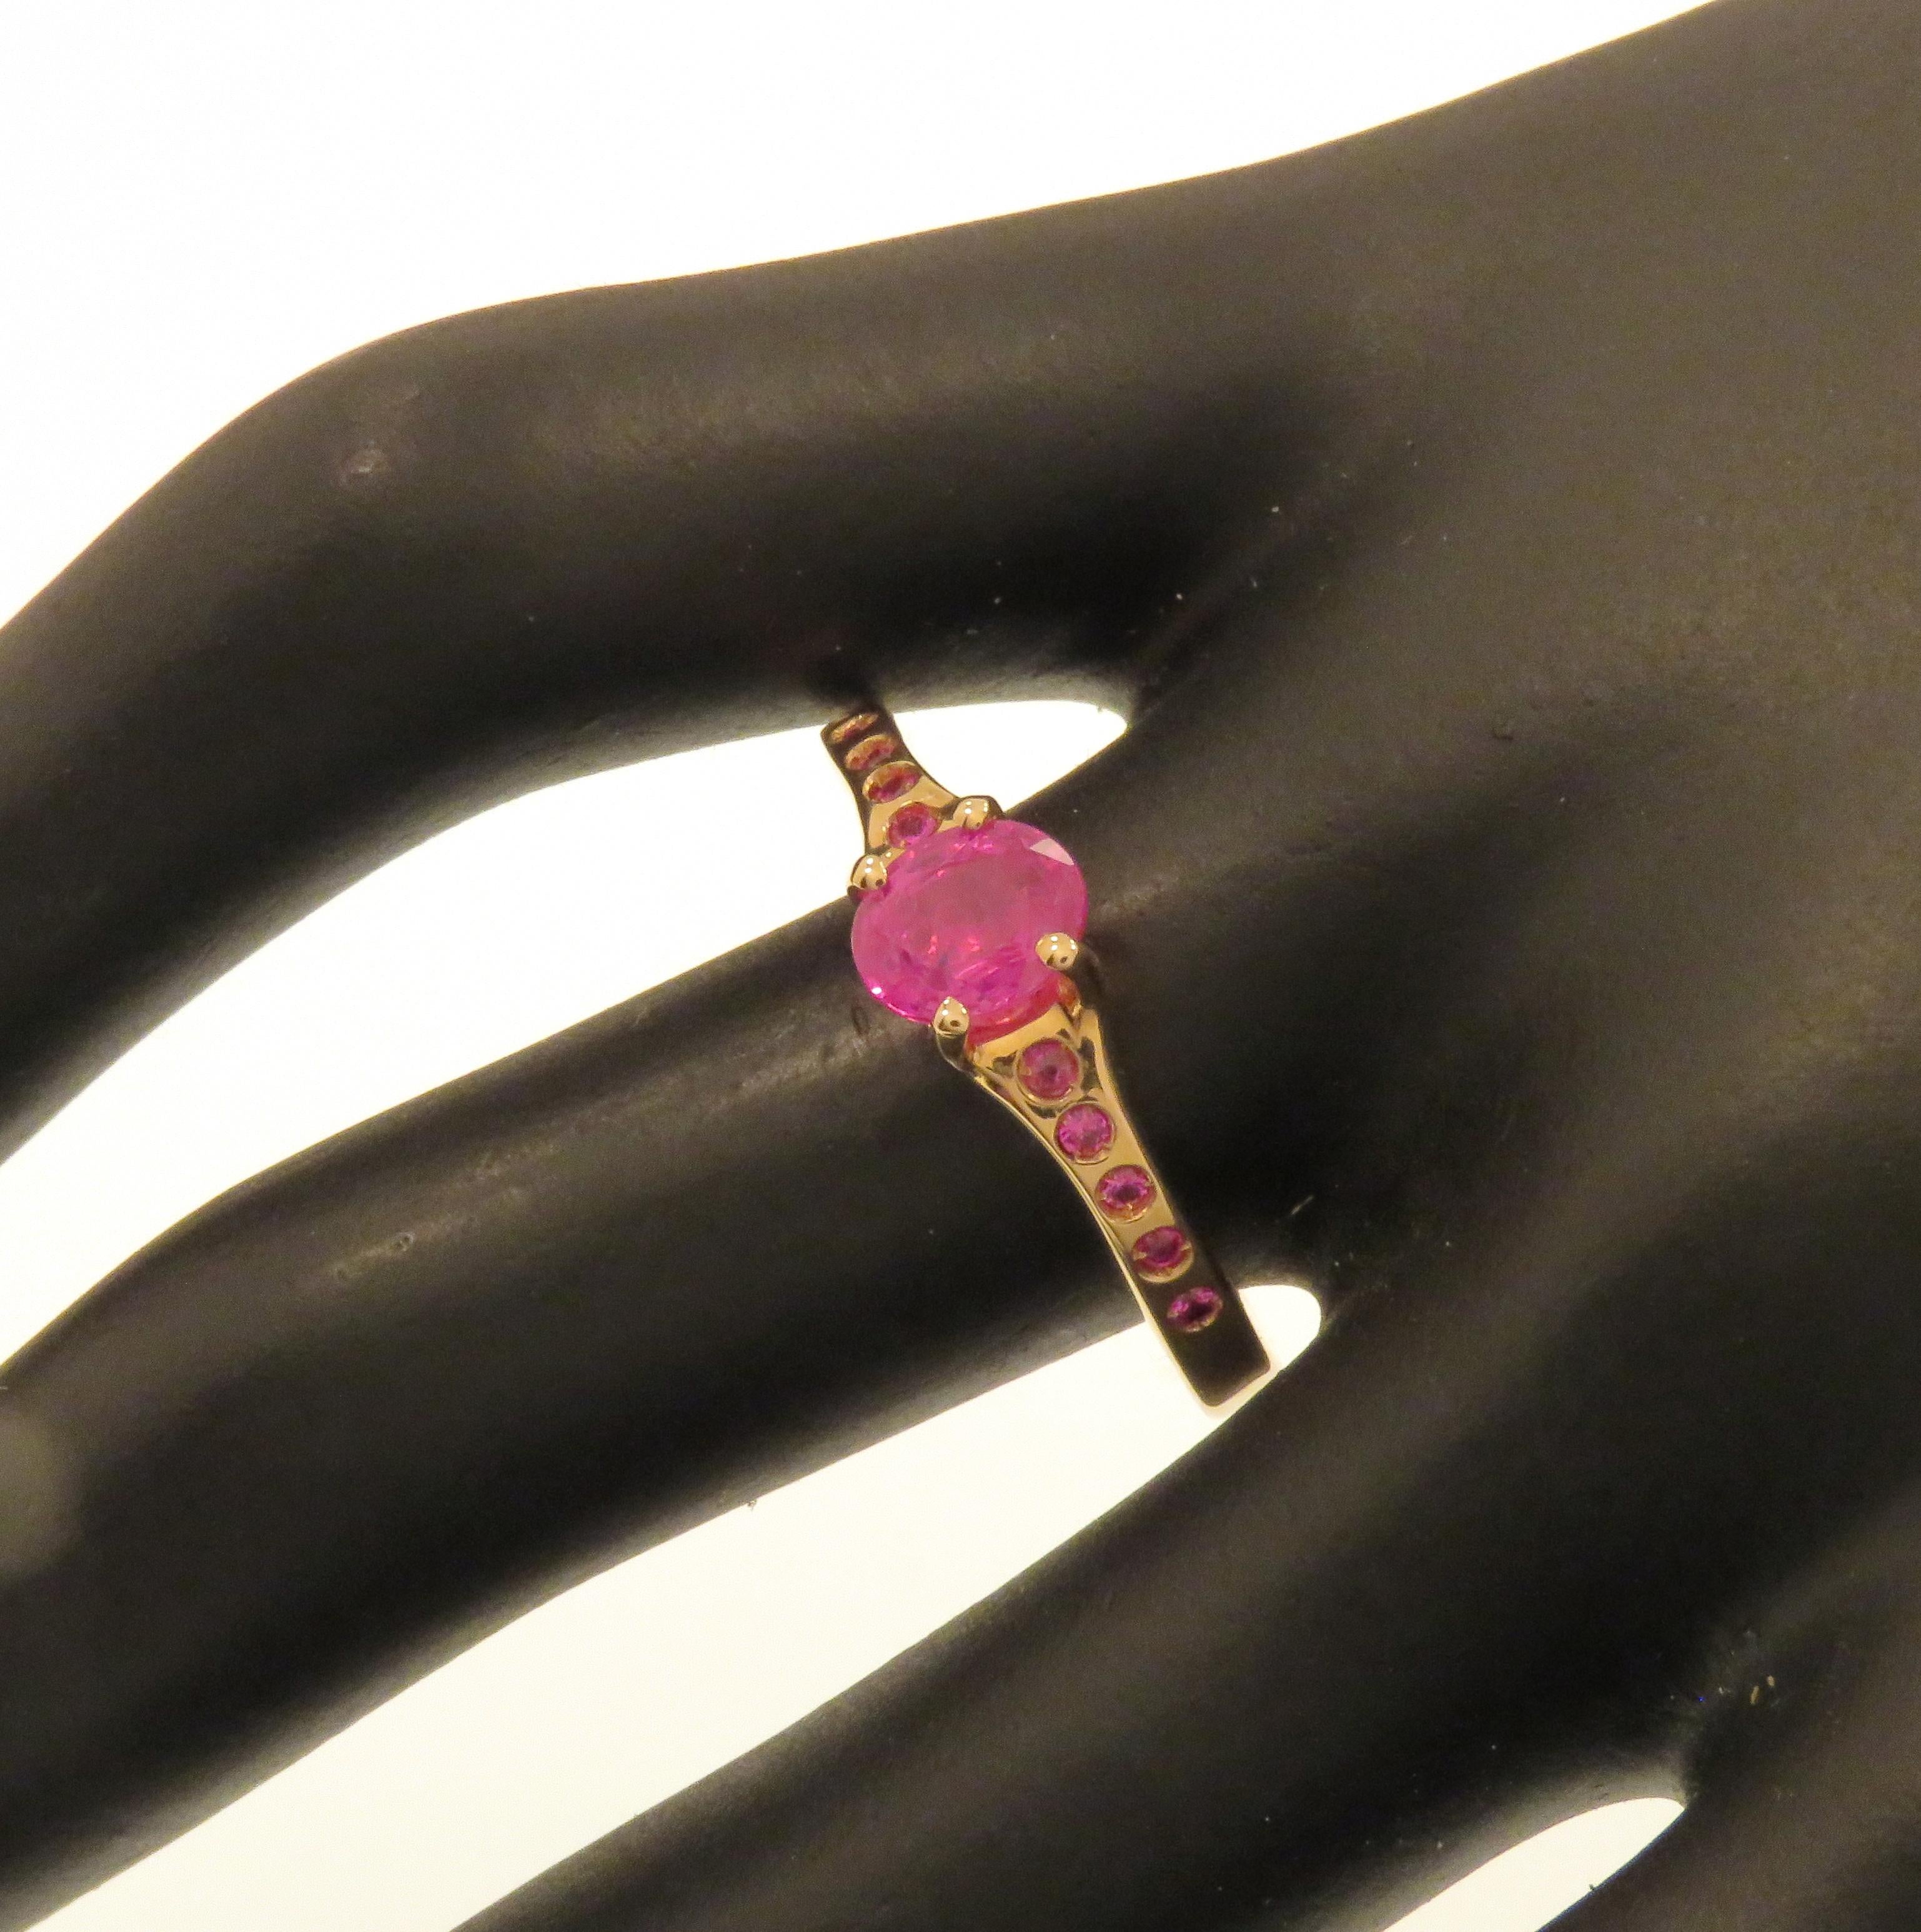 Stunning solitaire ring featuring a natural ruby oval cut and 10 rubies on the ring shoulders. Handmade in 9k rose gold. Marked with the Italian gold mark 375 and Botta Gioielli brandmark 716MI.
Jewelry report: AIG no. J5320105319.​

Handcrafted in: